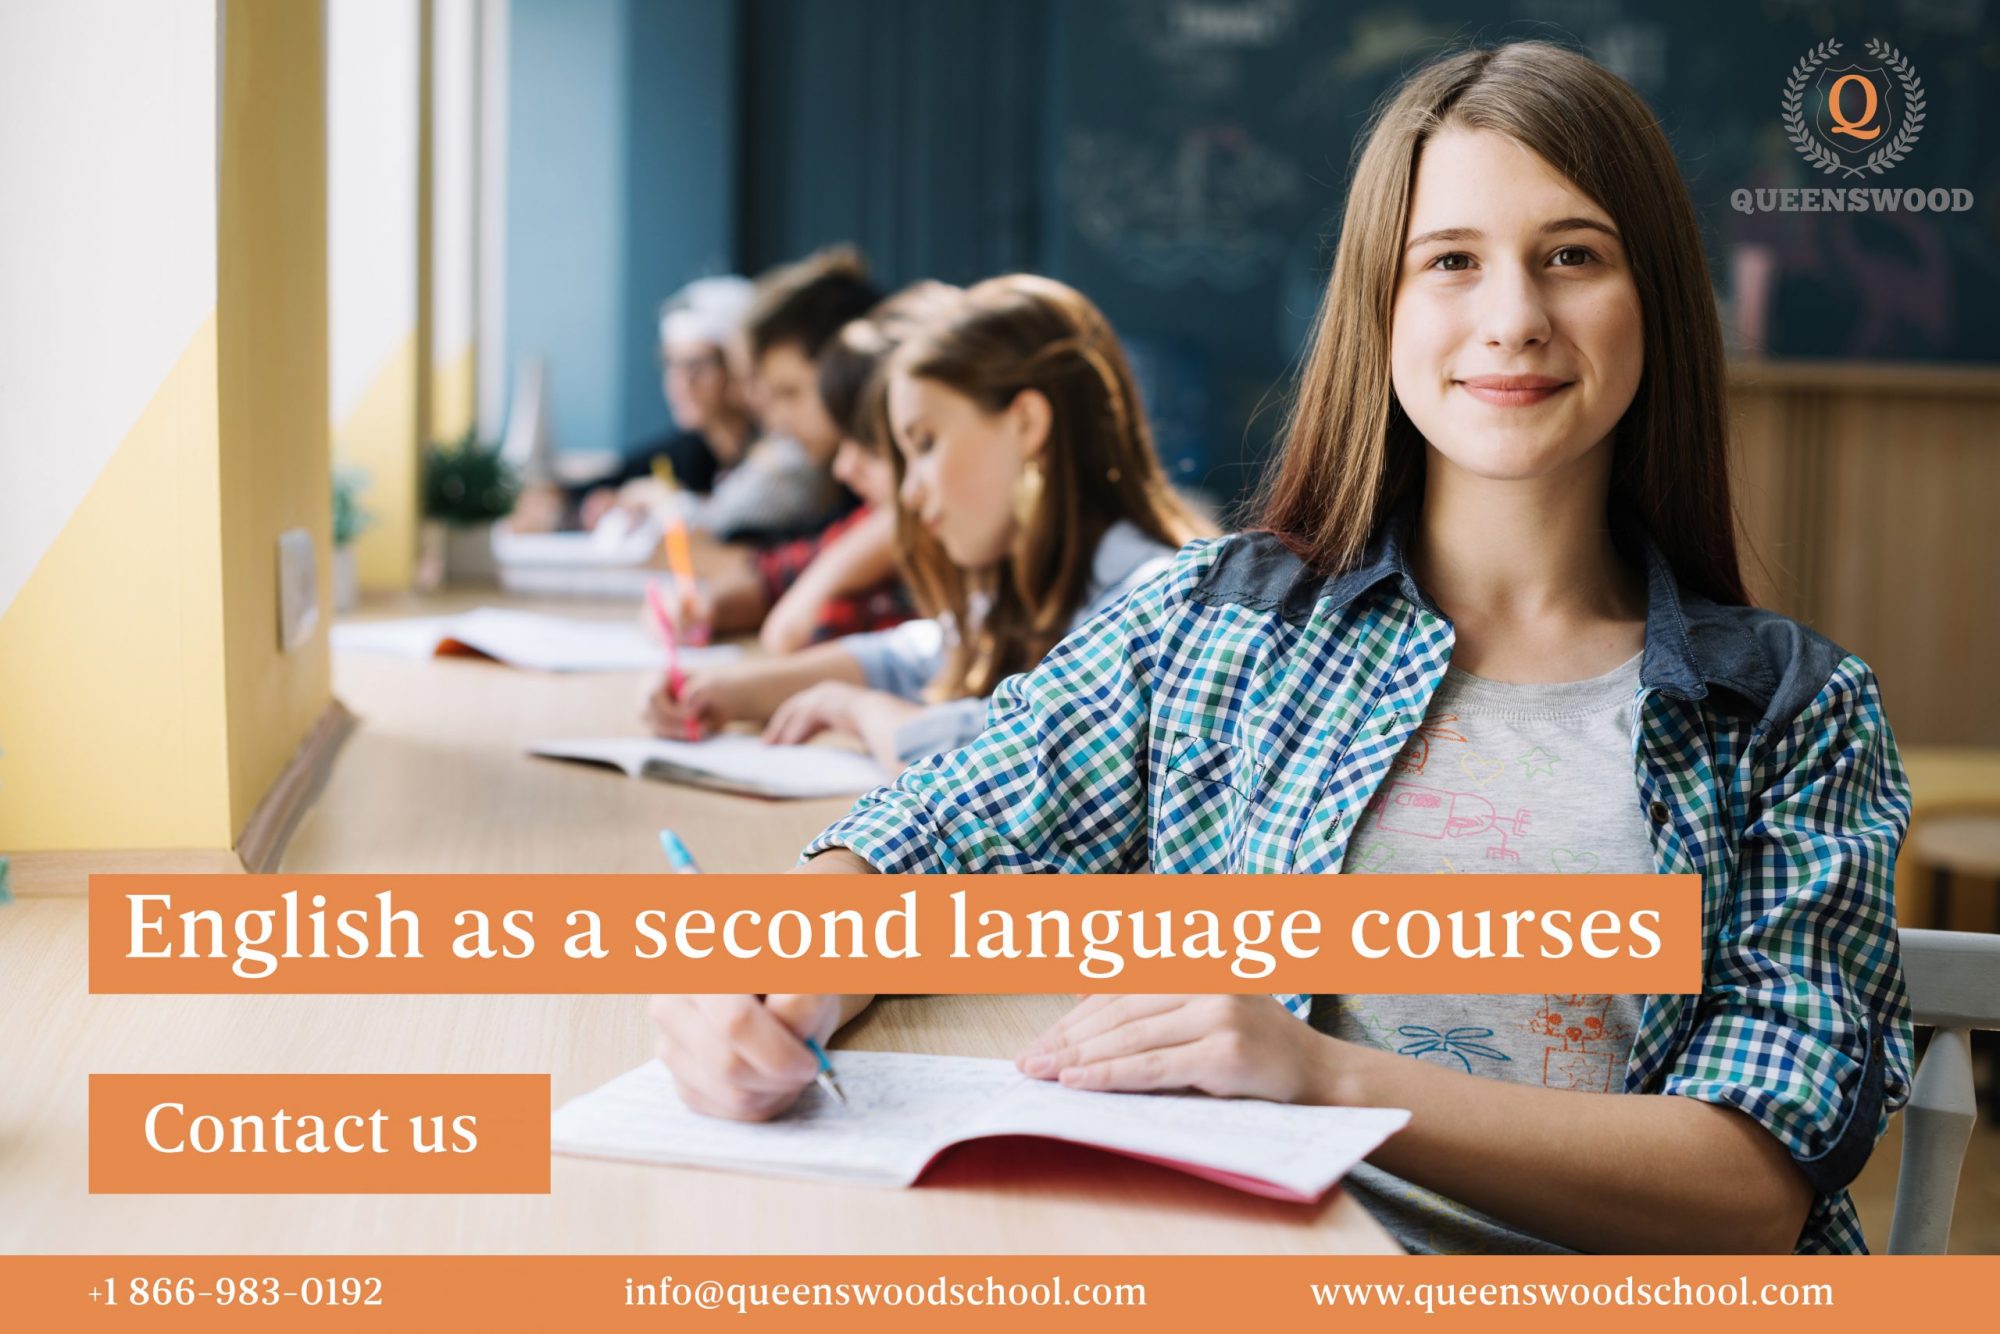 learn english at Queenswood